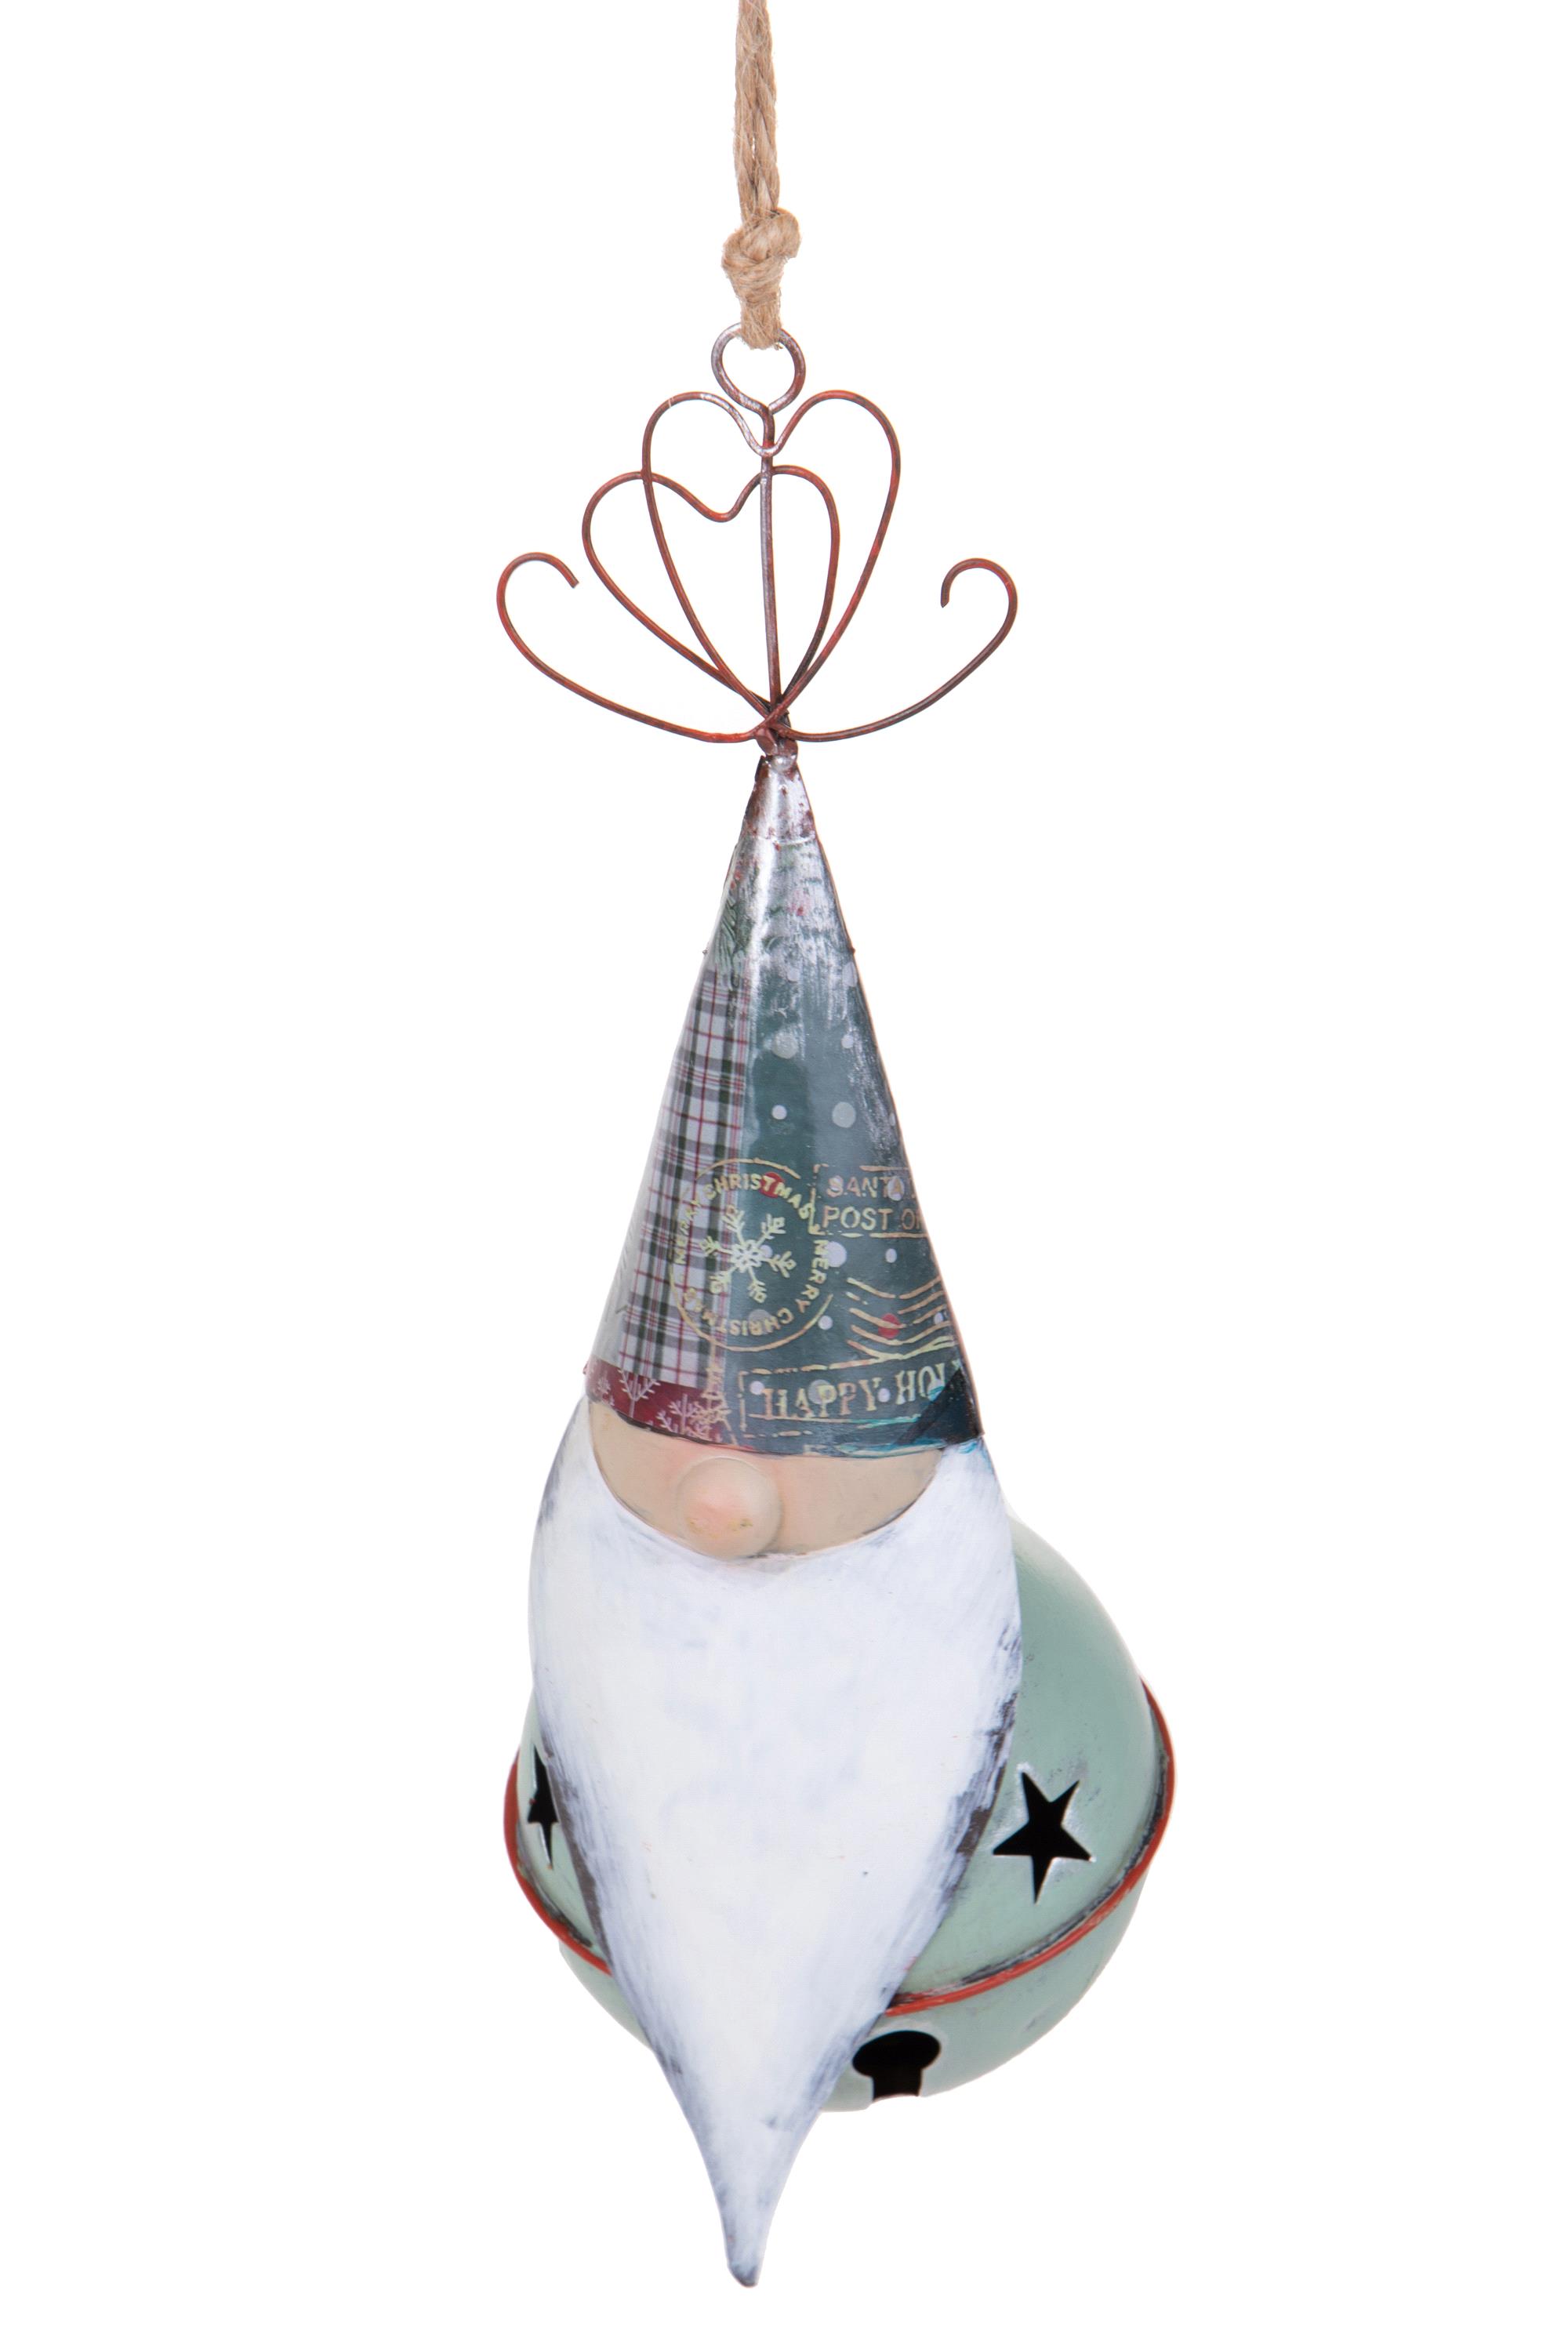 Home decors and accessories,CAMPANA H 41 CM D.11 CM C/BABBO NATALE